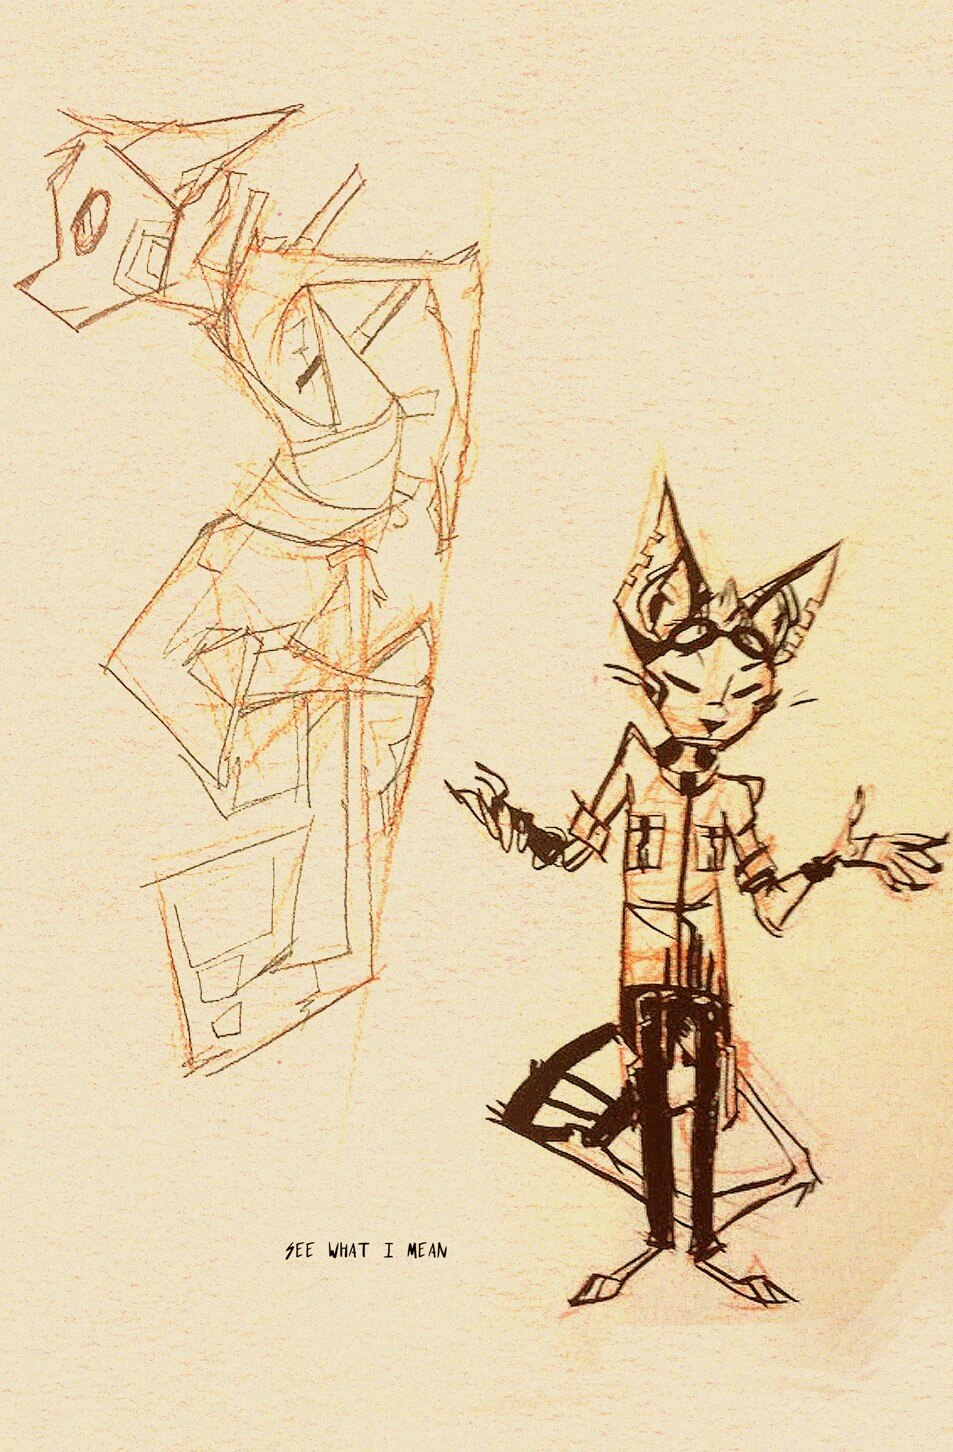 Two sketches of an anthro feline character. The one on the left is leaning up against a wall, and the one on the right is shrugging. The text reads "See what I mean".